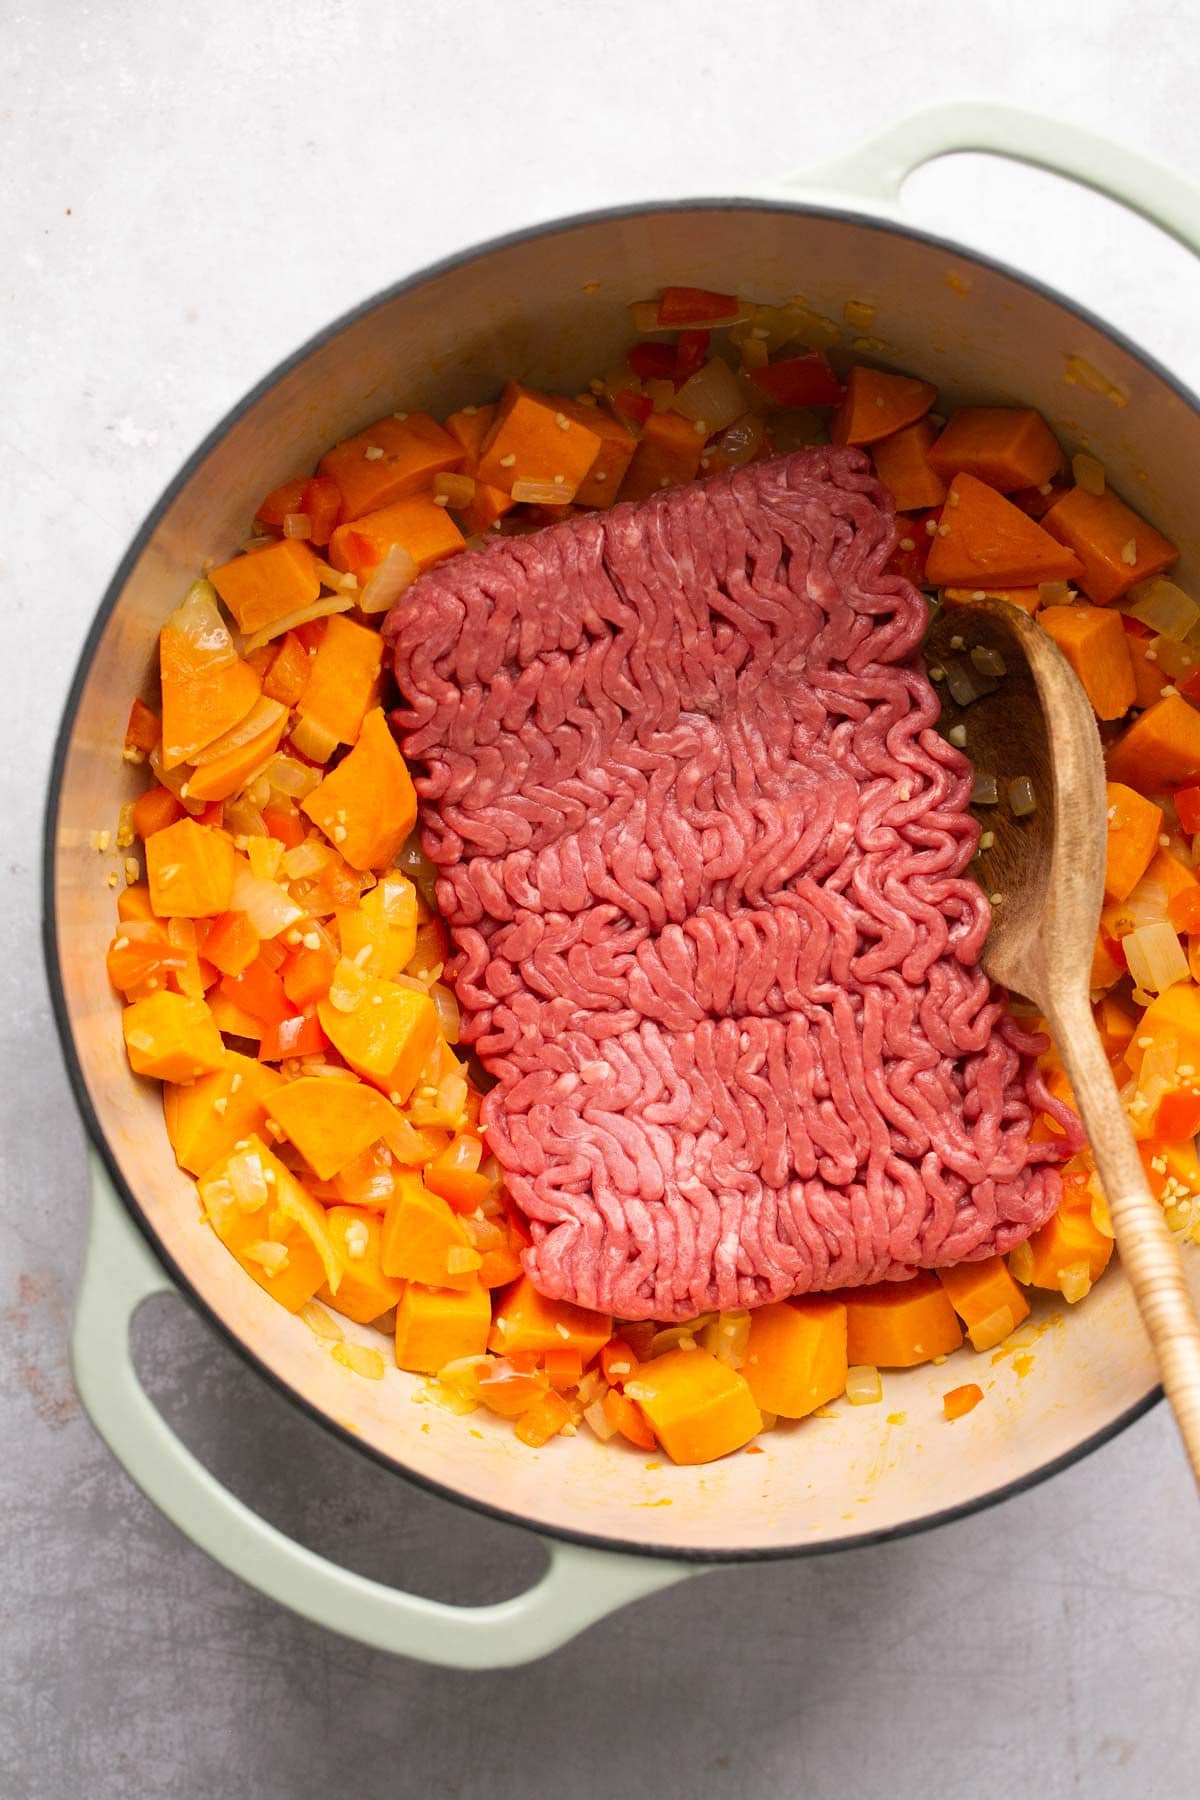 Adding ground beef to cooking vegetables.